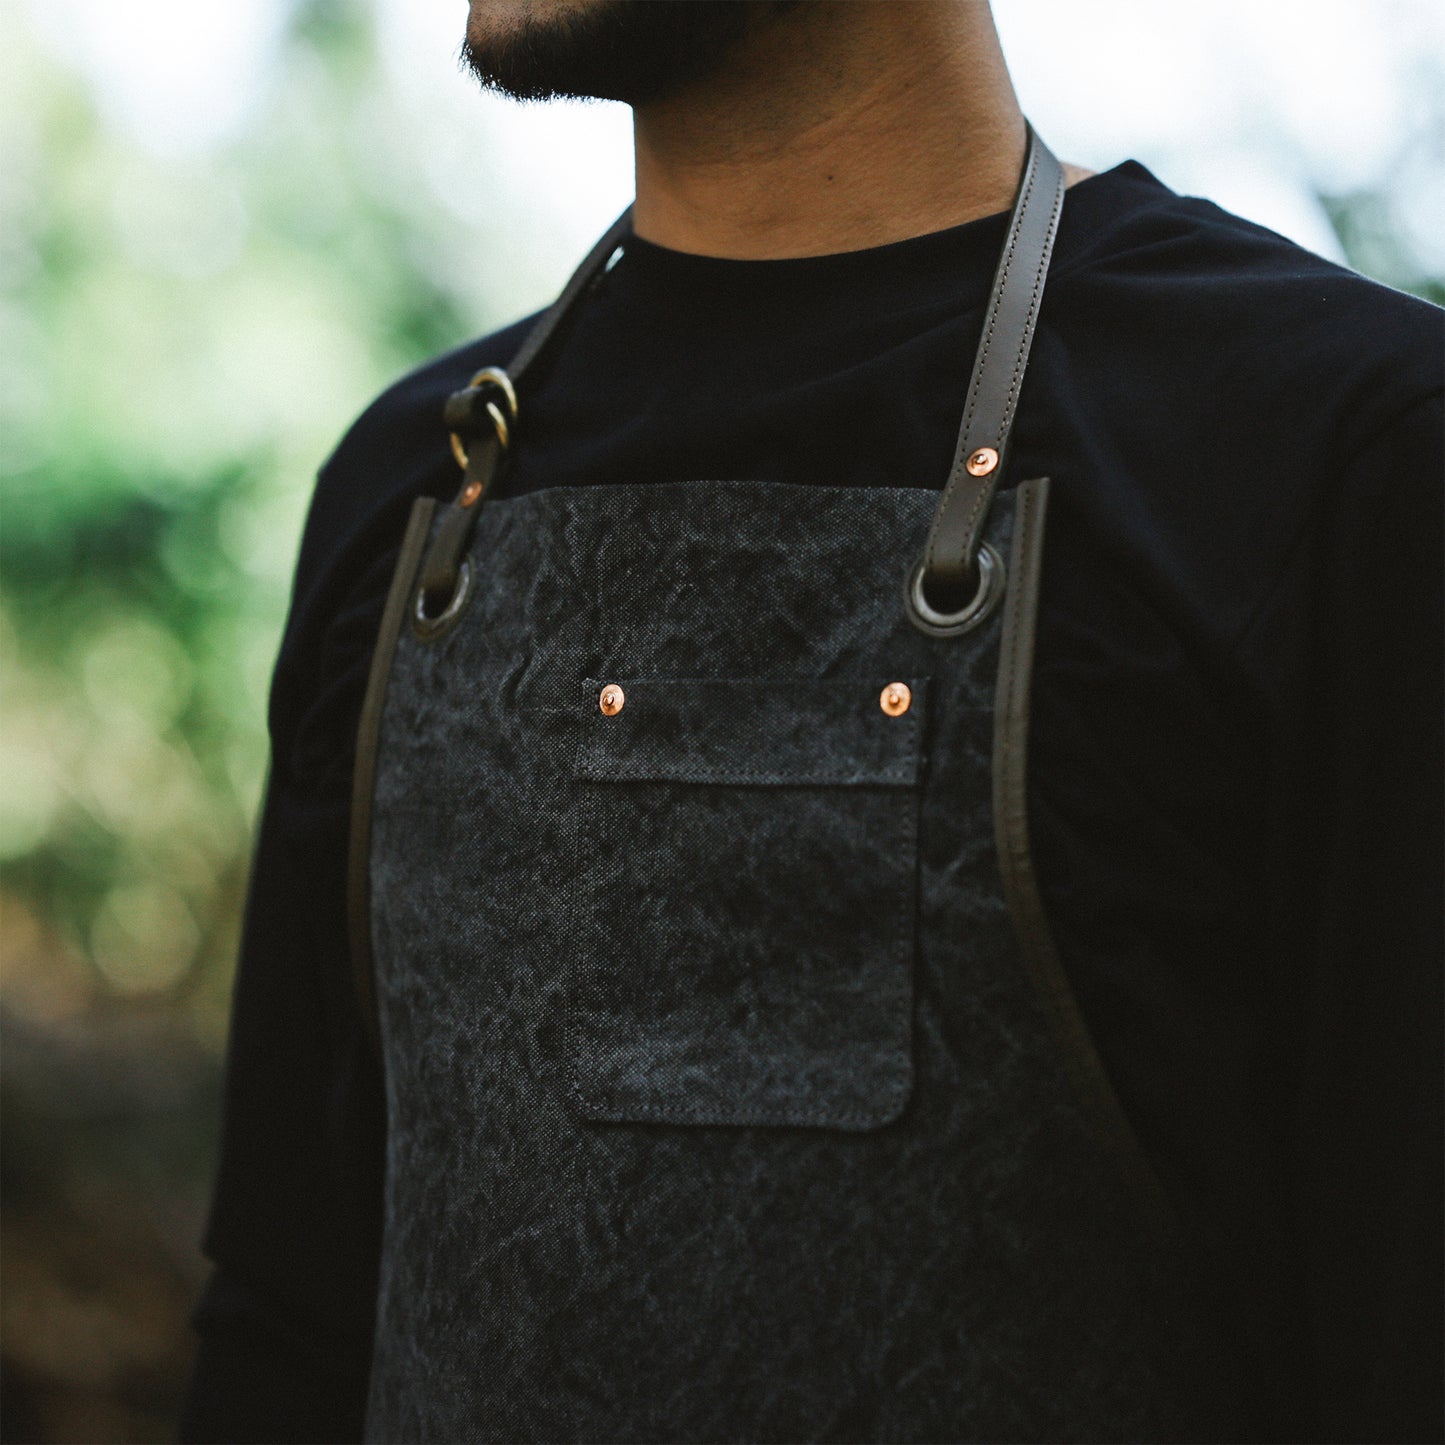 Natural Dye Col. / 15.2oz Heavy weight / Work Apron